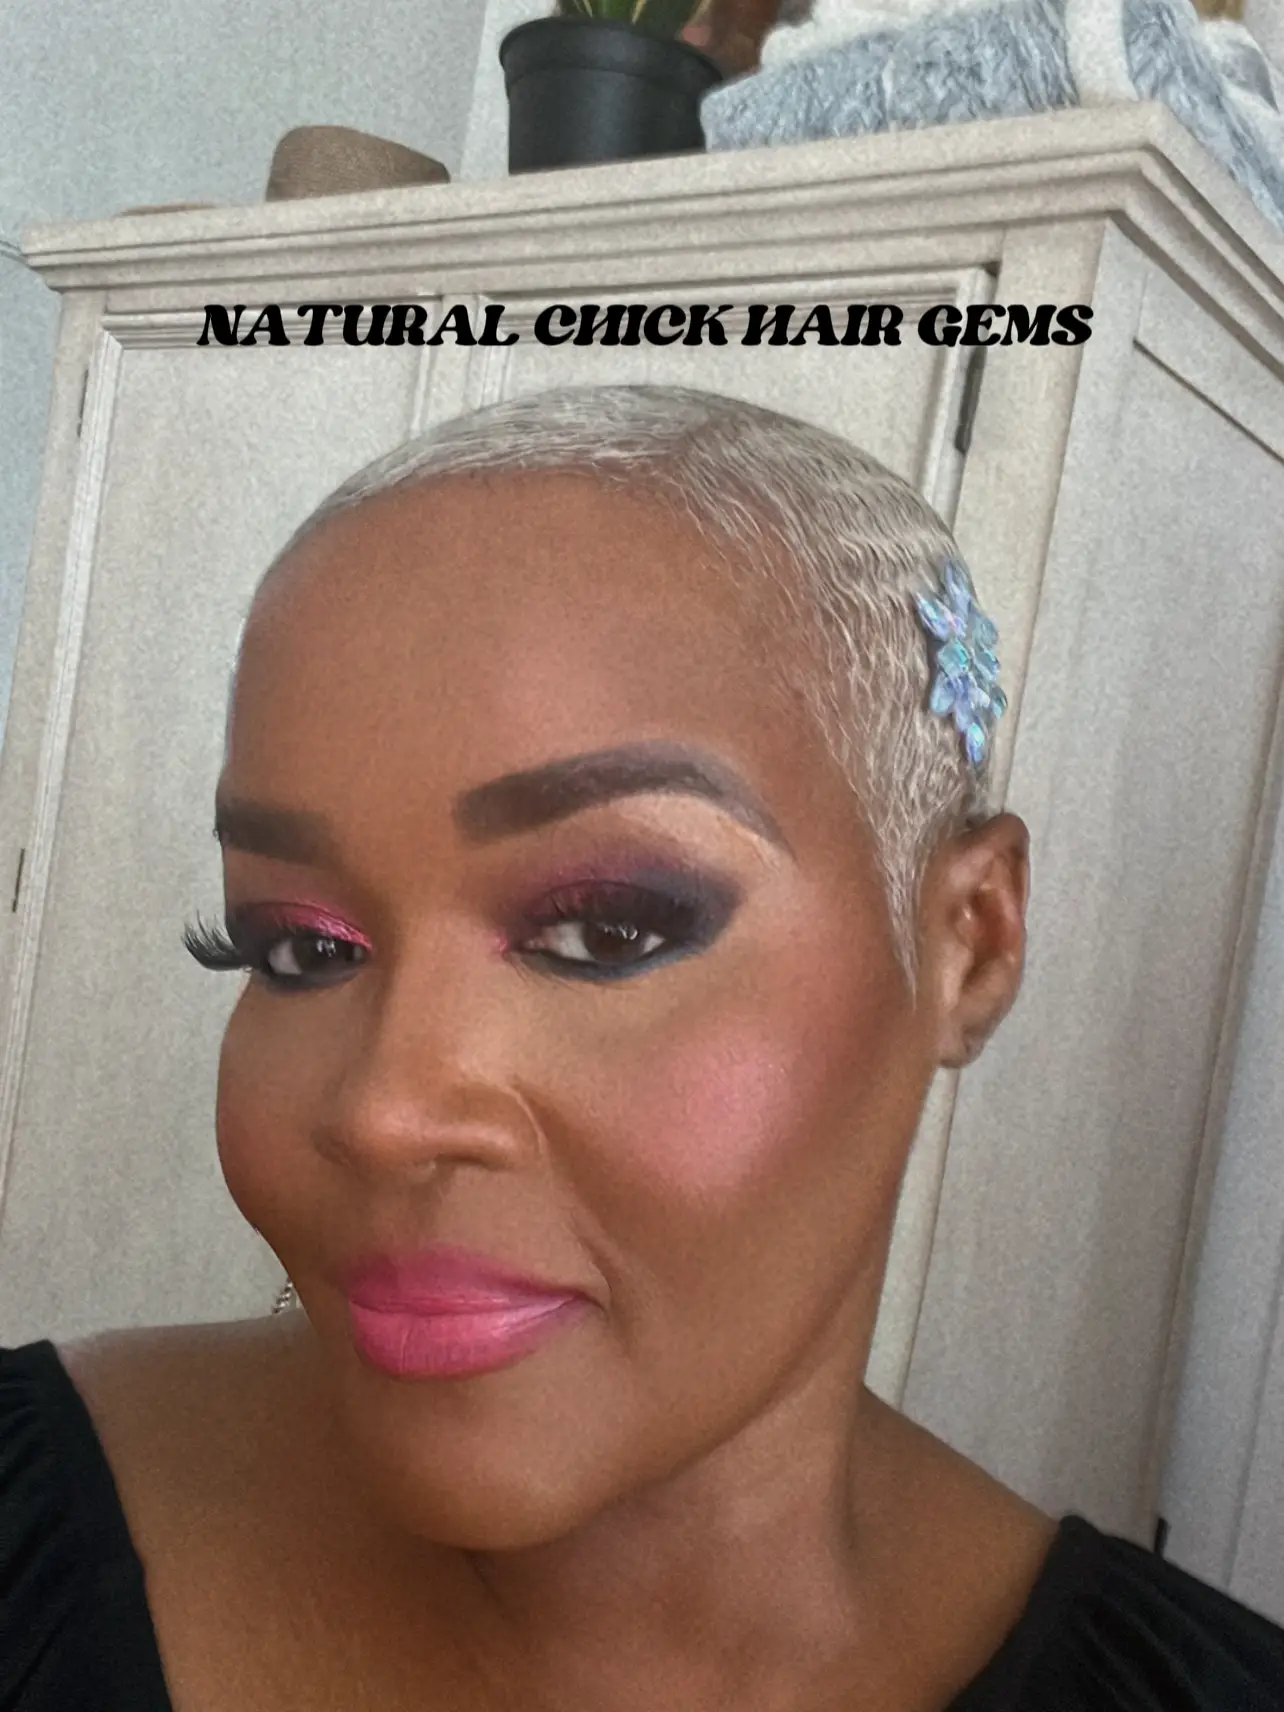 NATURAL CHICK SHORT HAIR GEMS, Gallery posted by Short Hair Gems